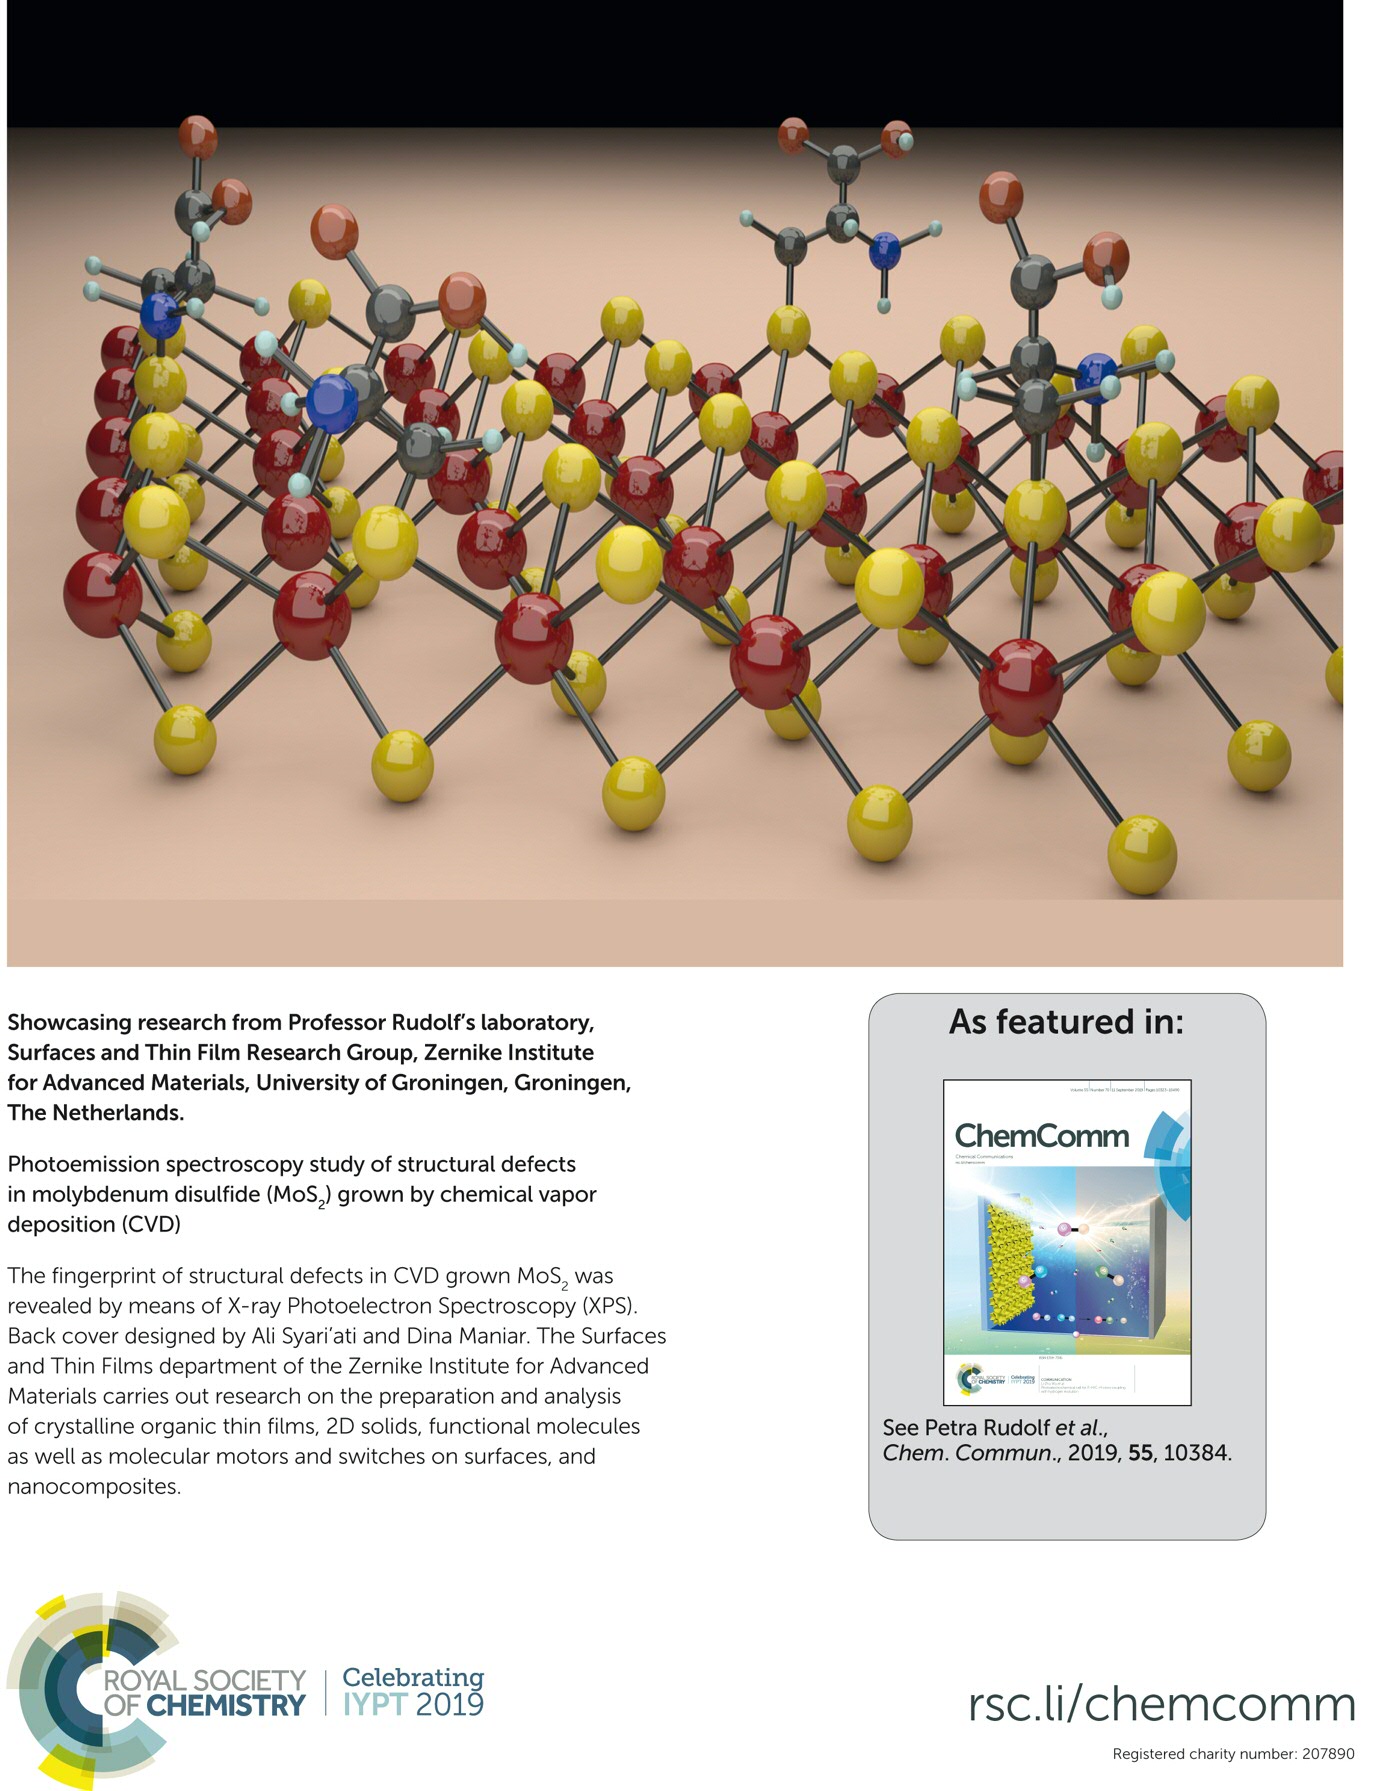 Prof. Rudolfs work was recently featured on the cover of ChemComm. For accessing the article please follow this link: http://xlink.rsc.org/?DOI=C9CC01577A or visit the ChemComm homepage at www.rsc.org/chemcomm.